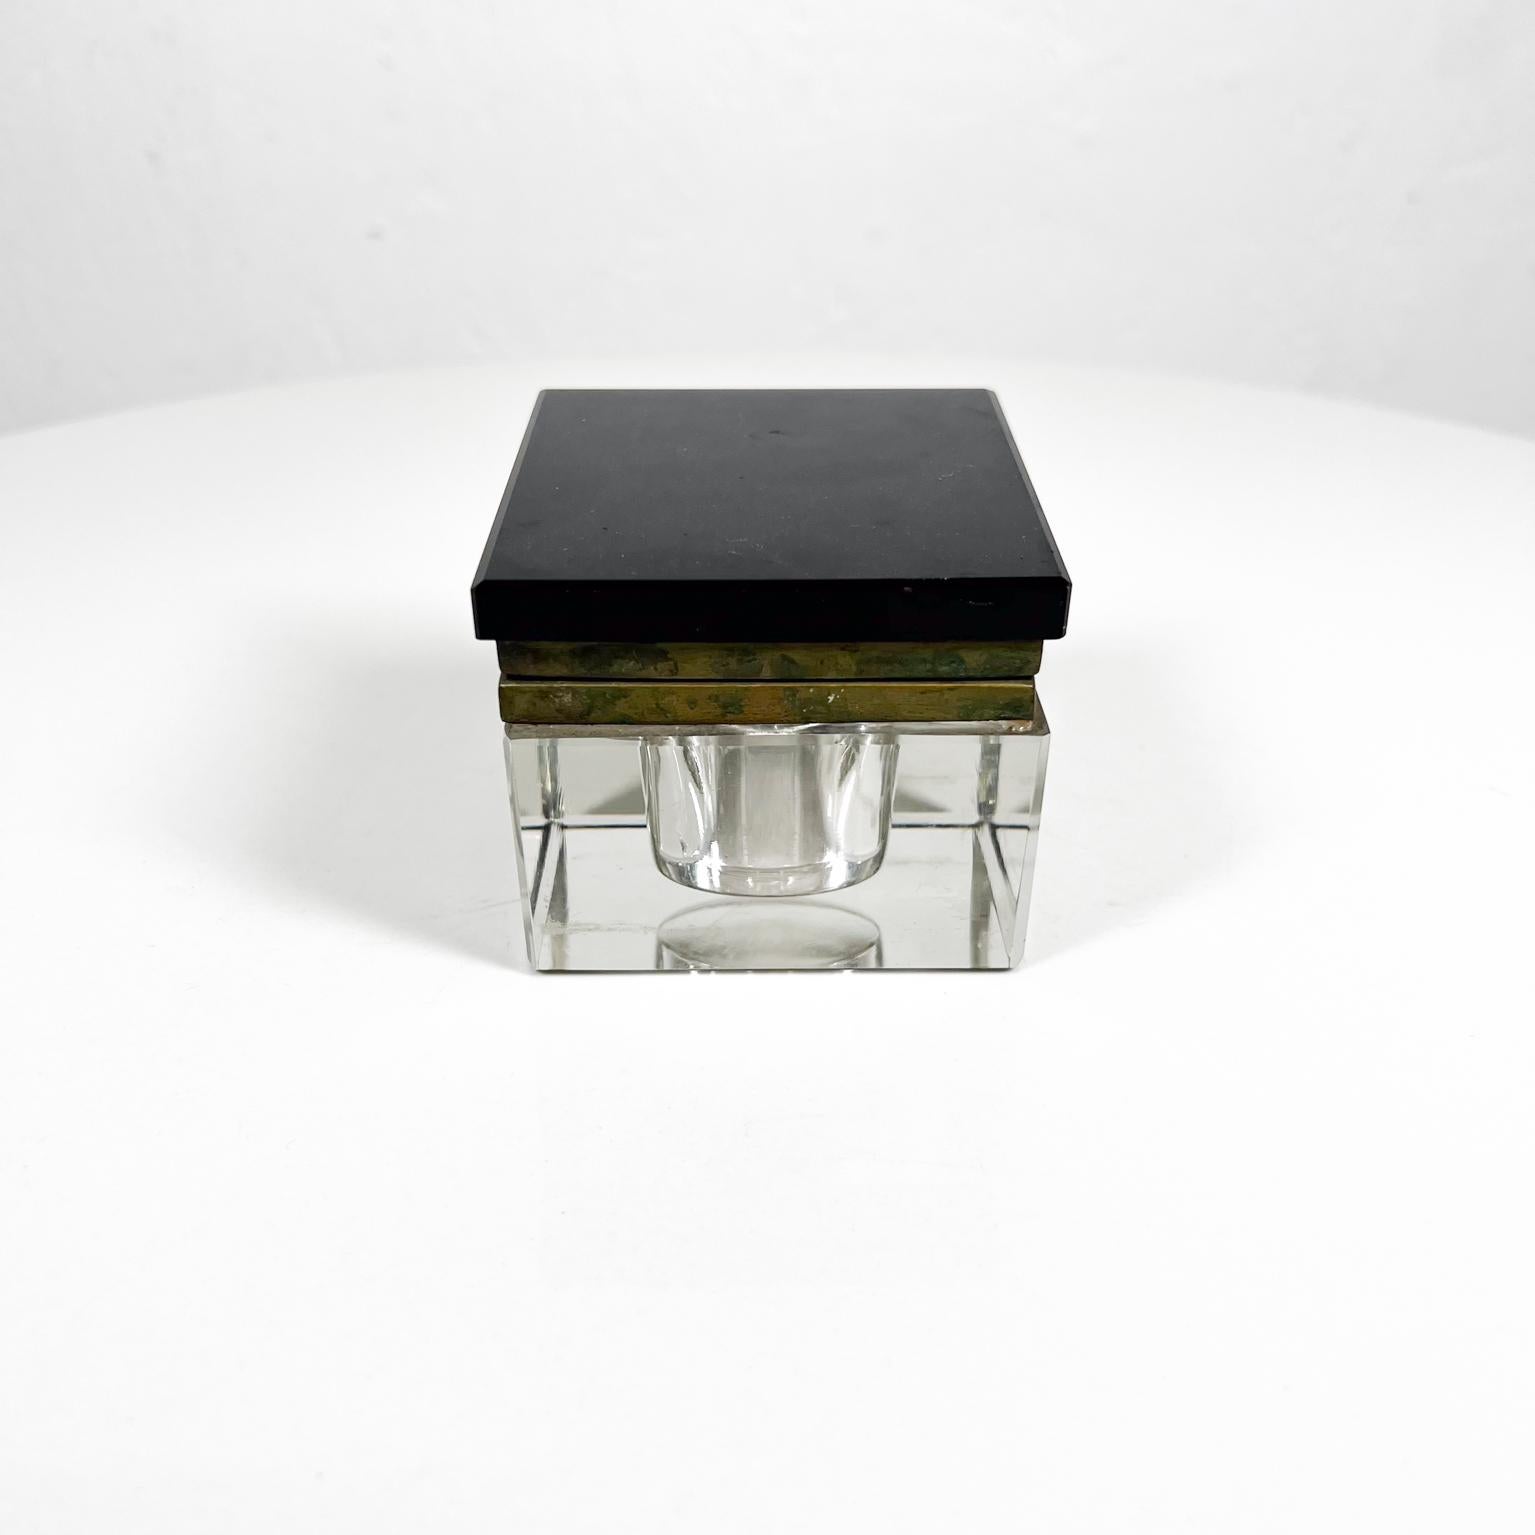 1920s Art Deco Inkwell Modern Beveled Solid Glass and Brass In Good Condition For Sale In Chula Vista, CA